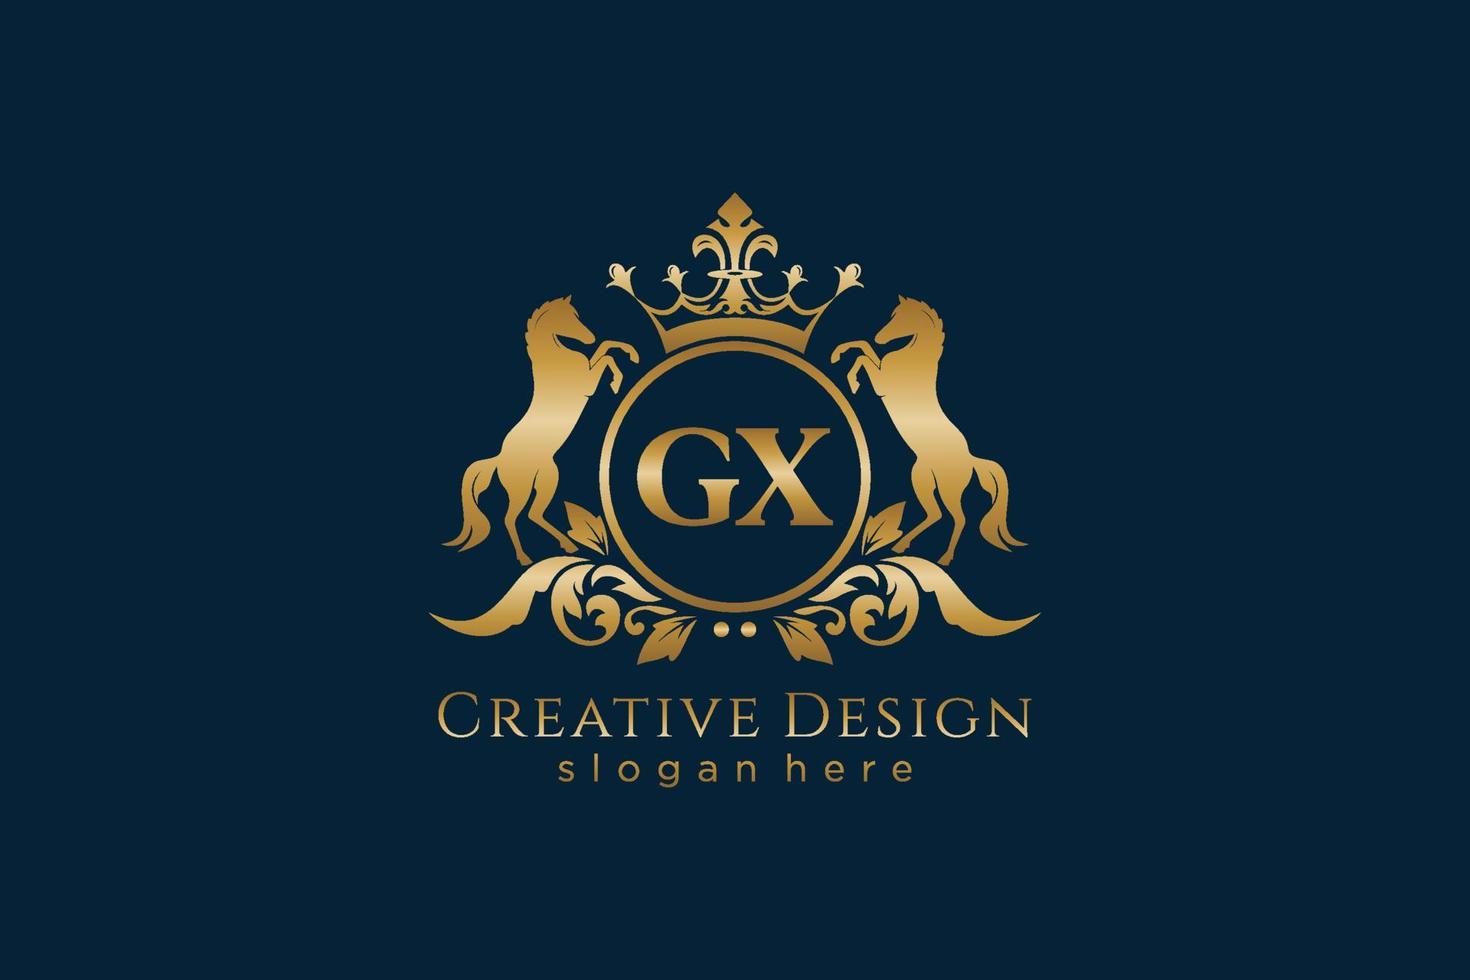 initial GX Retro golden crest with circle and two horses, badge template with scrolls and royal crown - perfect for luxurious branding projects vector